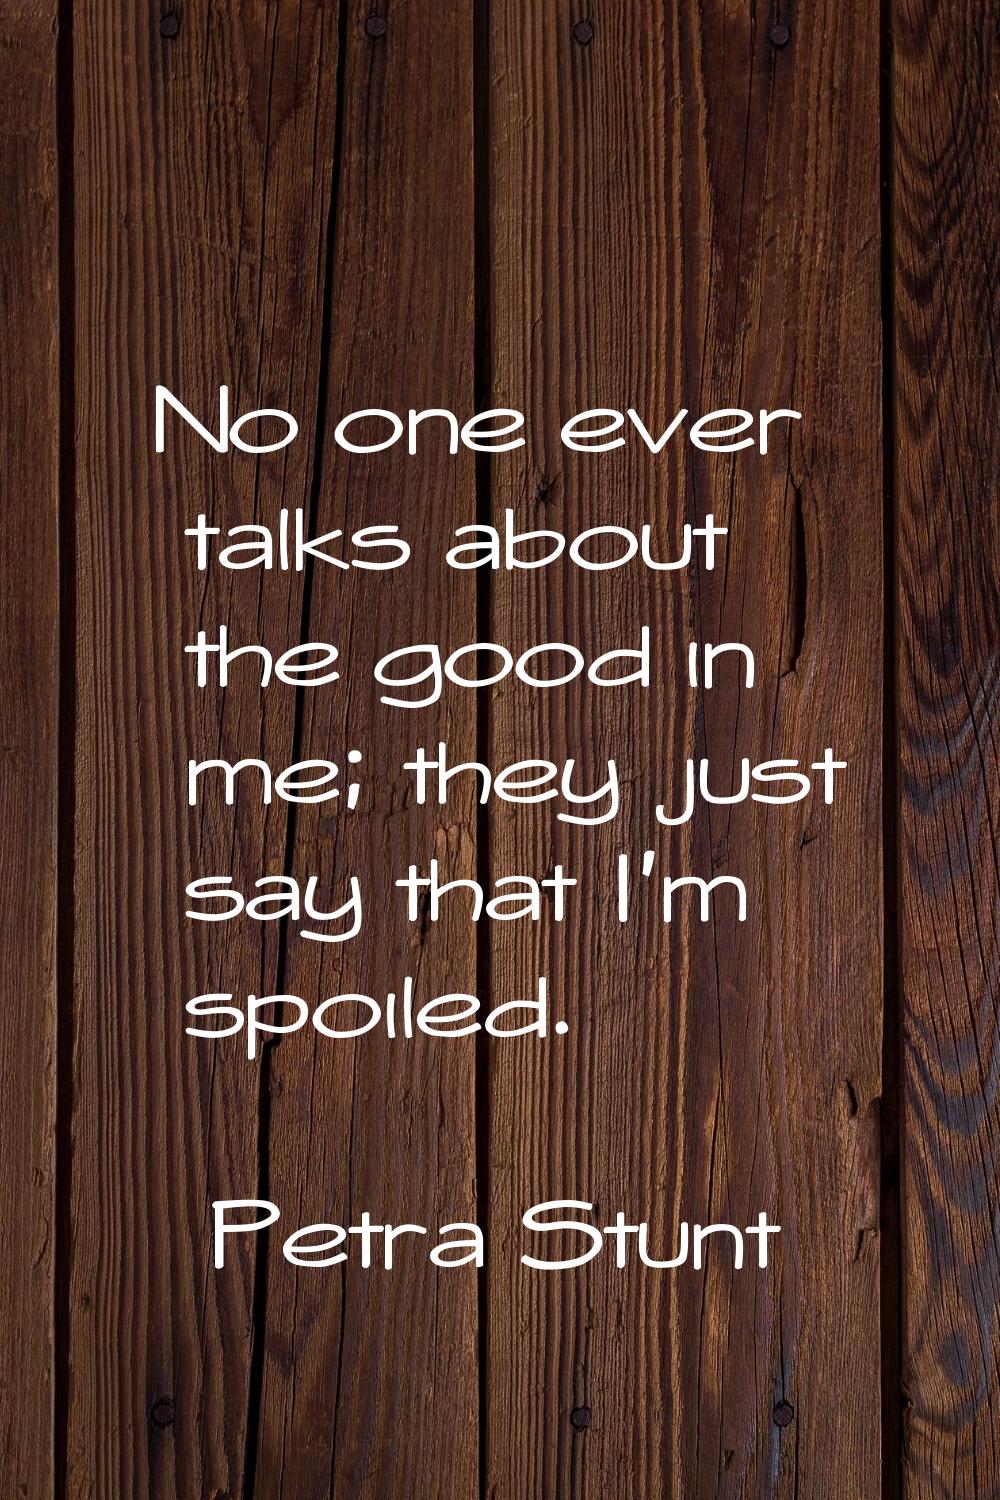 No one ever talks about the good in me; they just say that I'm spoiled.